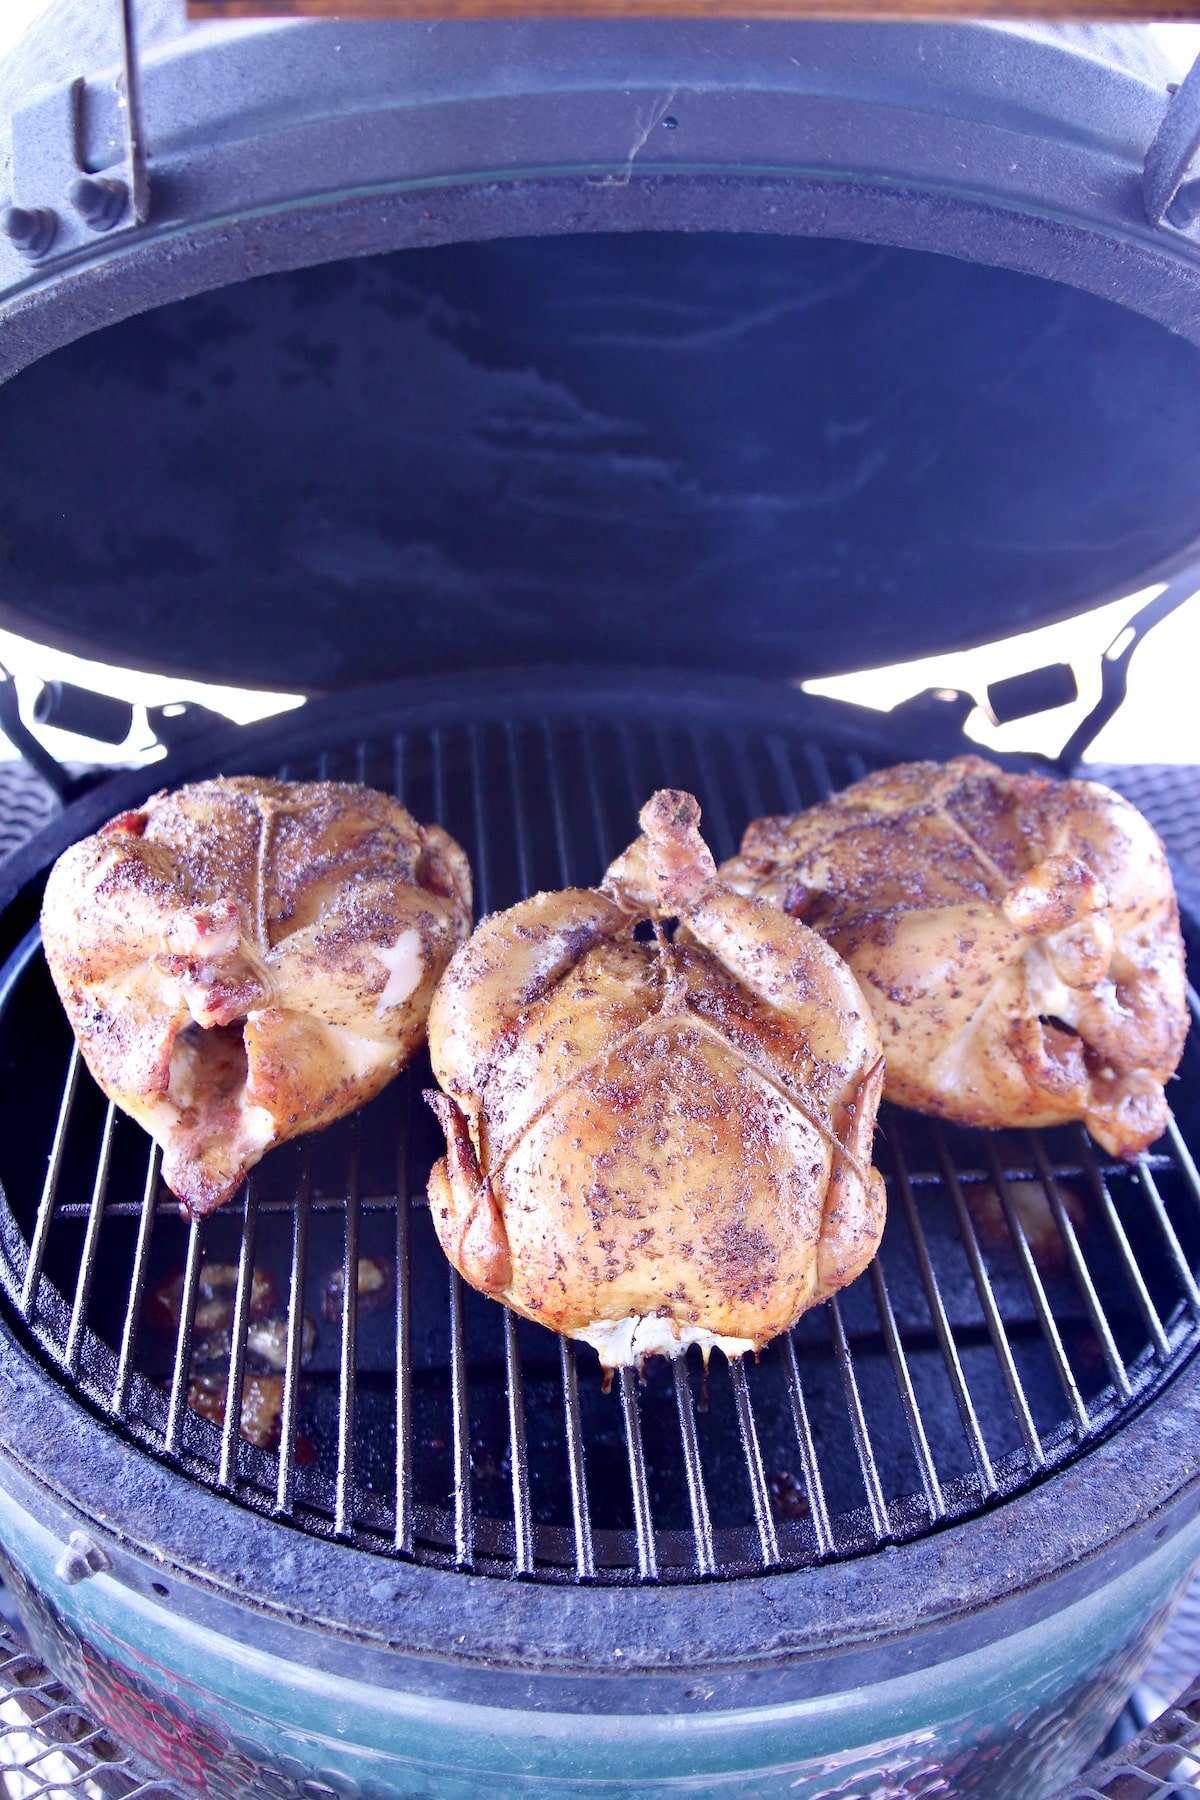 3 smoky whole chickens on a grill.